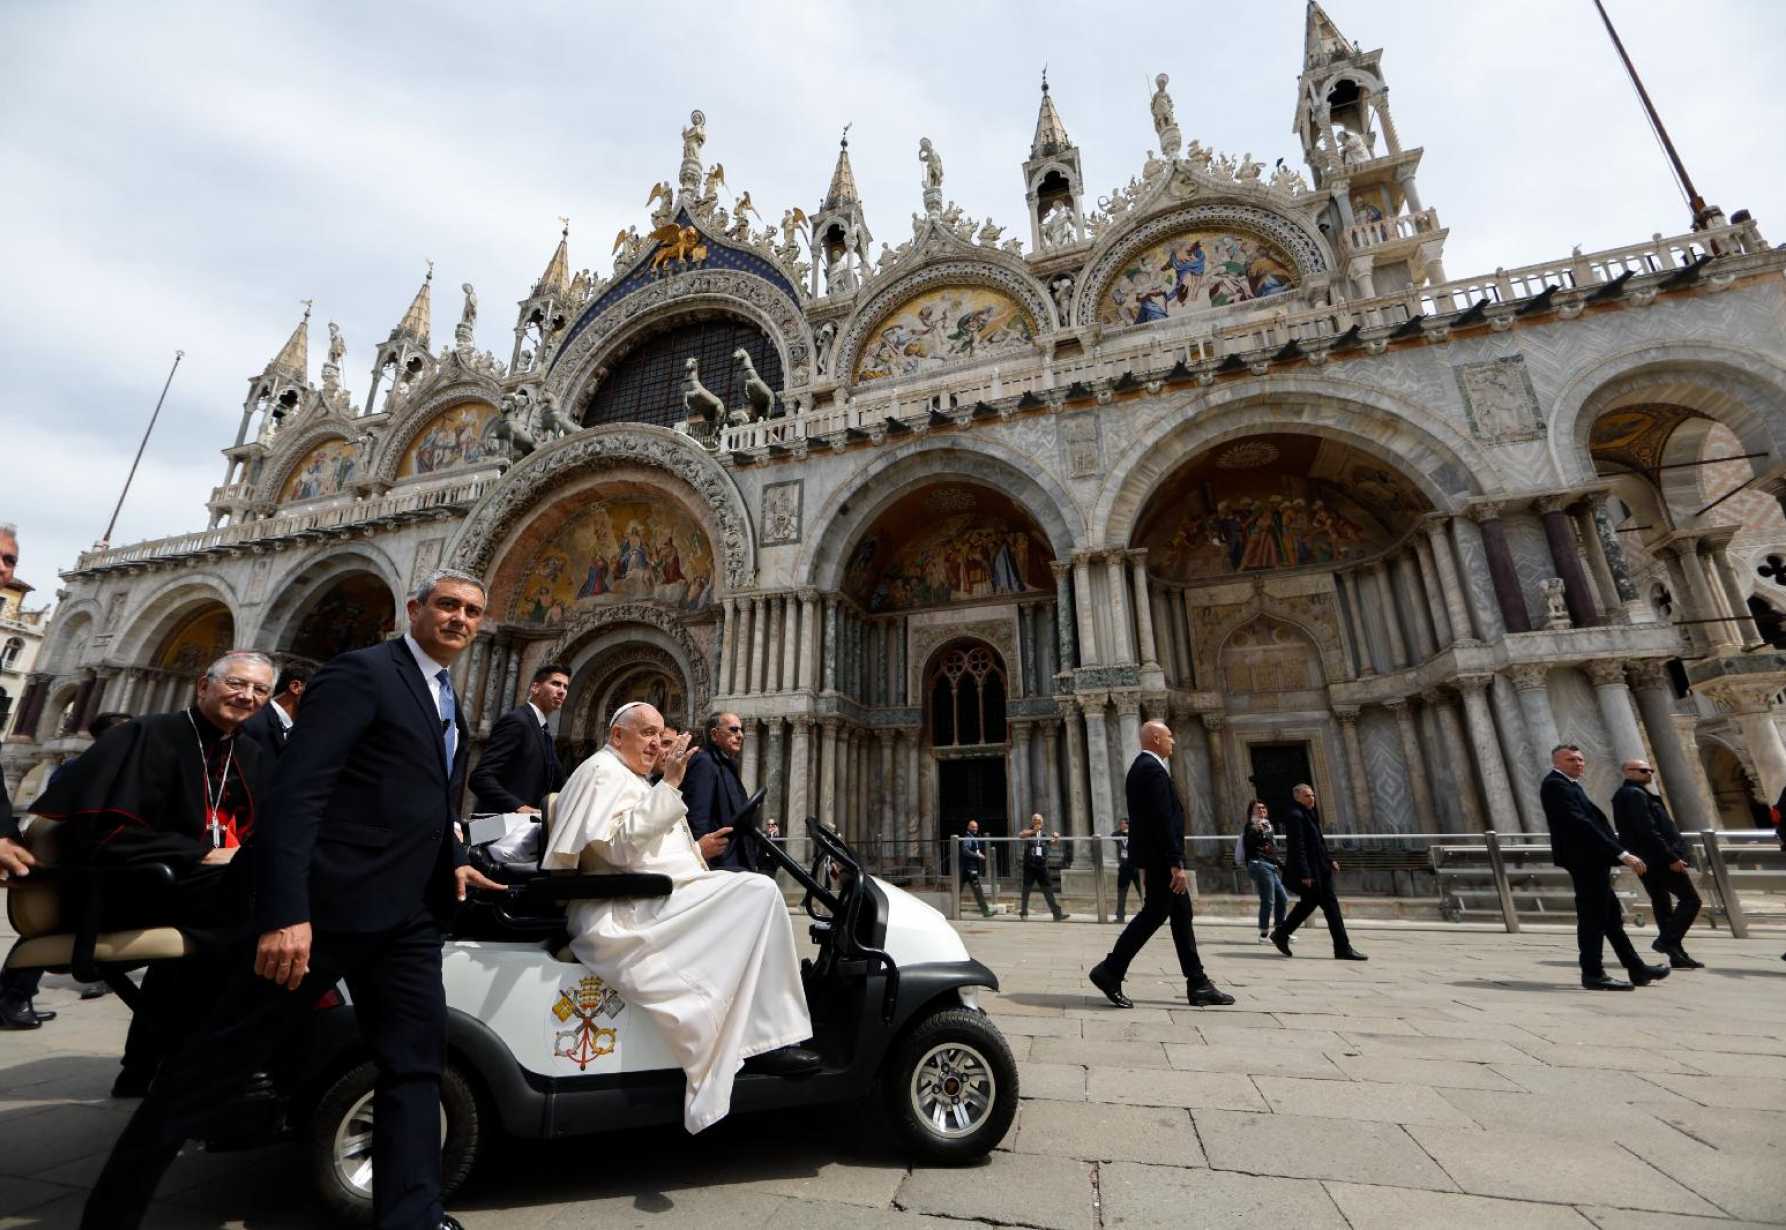 Like Venice, people are beautiful, fragile, pope says in city built on water